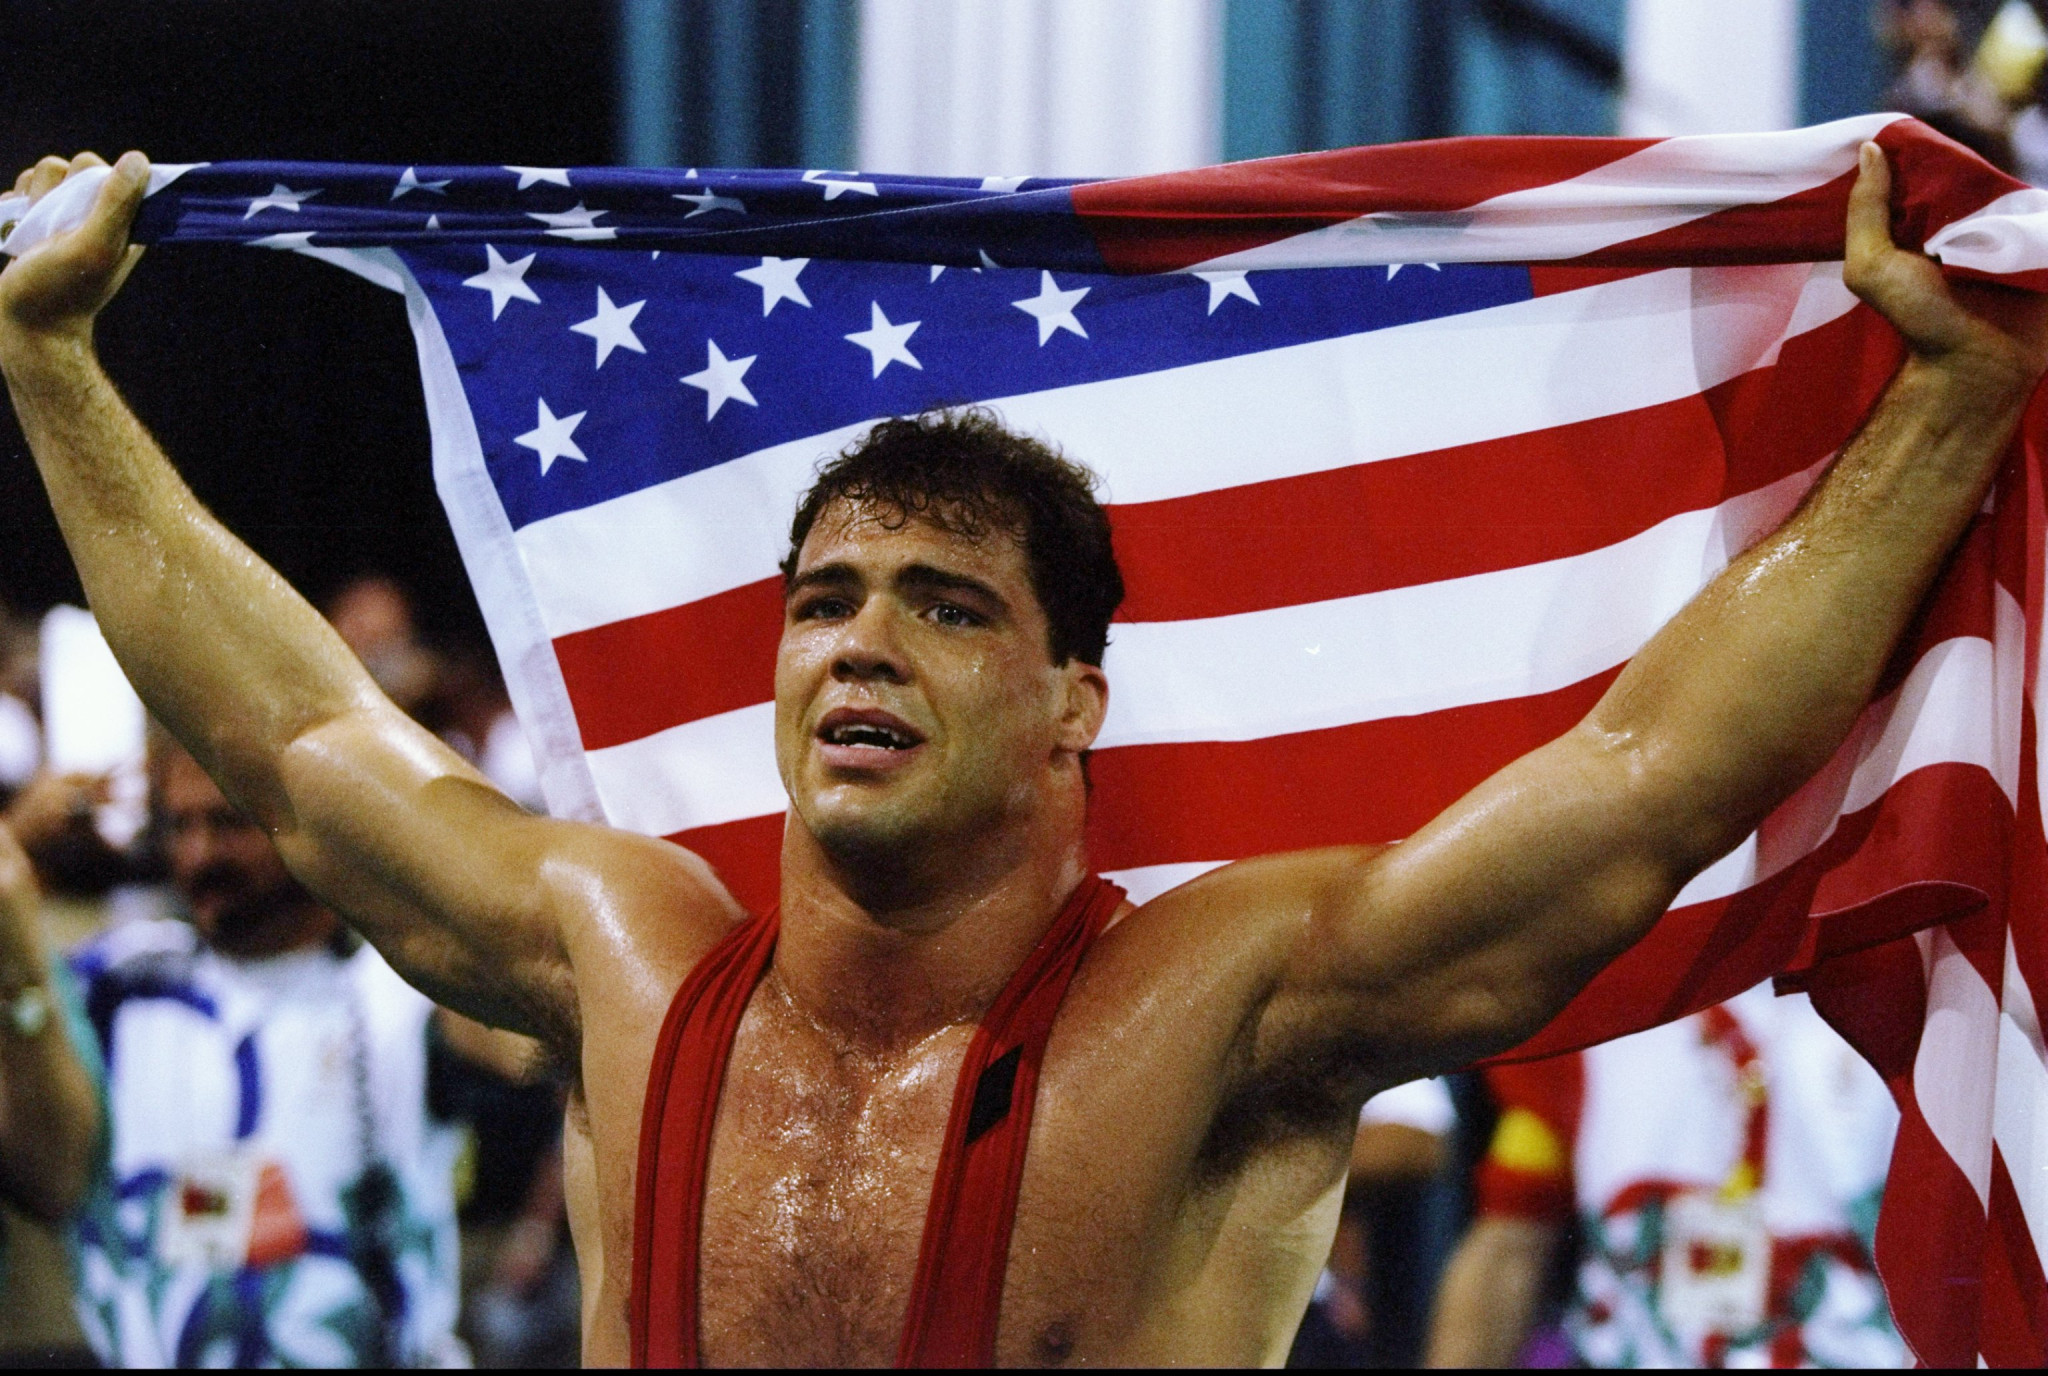 Kurt Angle is one of the most famous Olympic wrestlers in history ©Getty Images